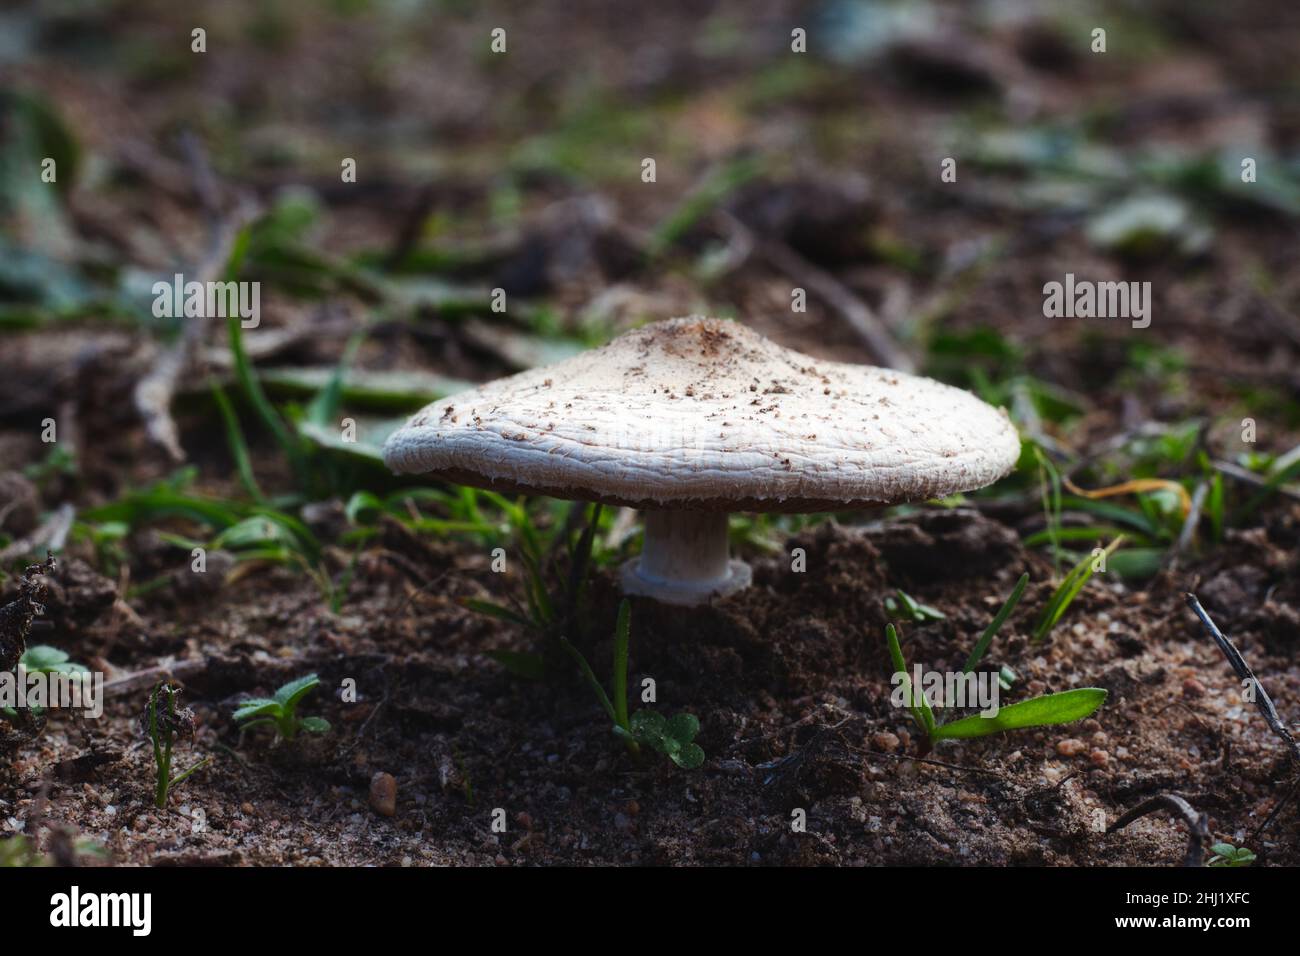 Big white fairy ring mushroom growing in a lawn or field Stock Photo